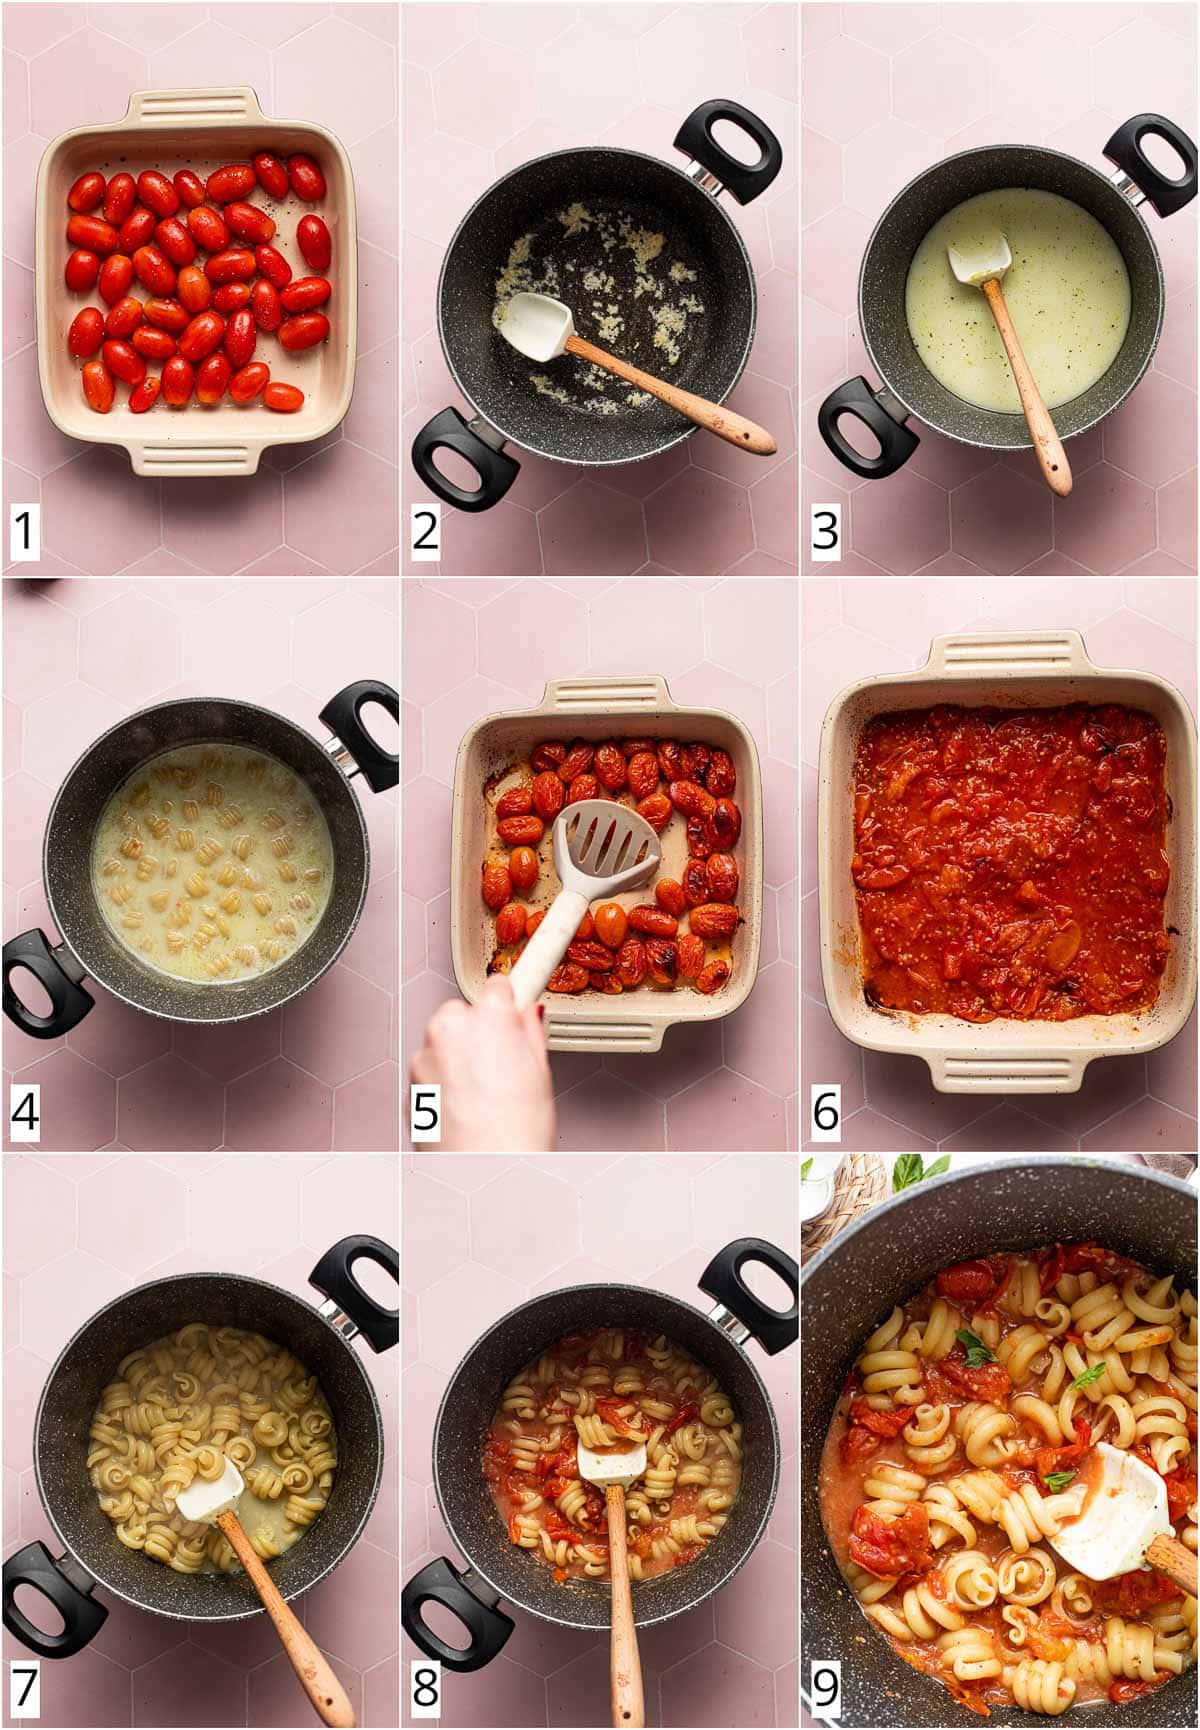 A collage of nine images showing steps in making tomato pasta. 